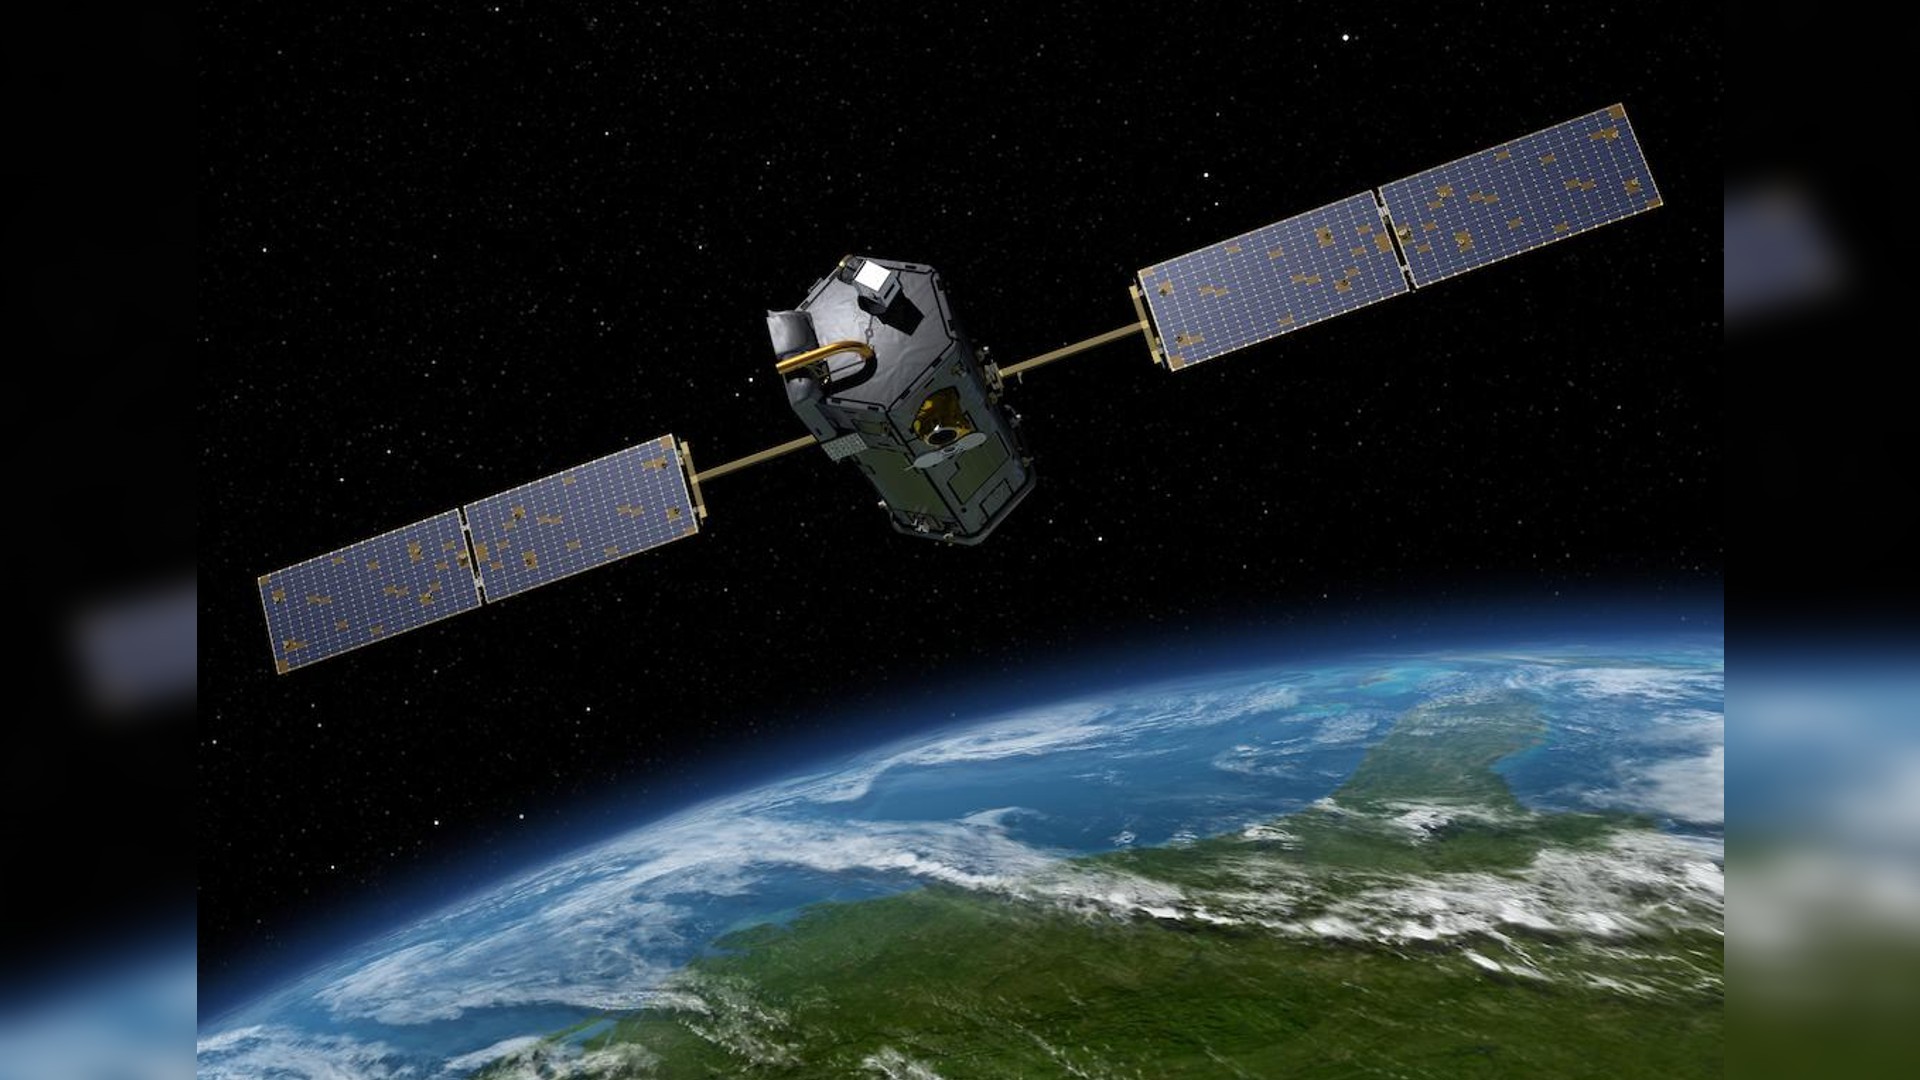 Tracking CO2 emissions from space could help support climate agreements